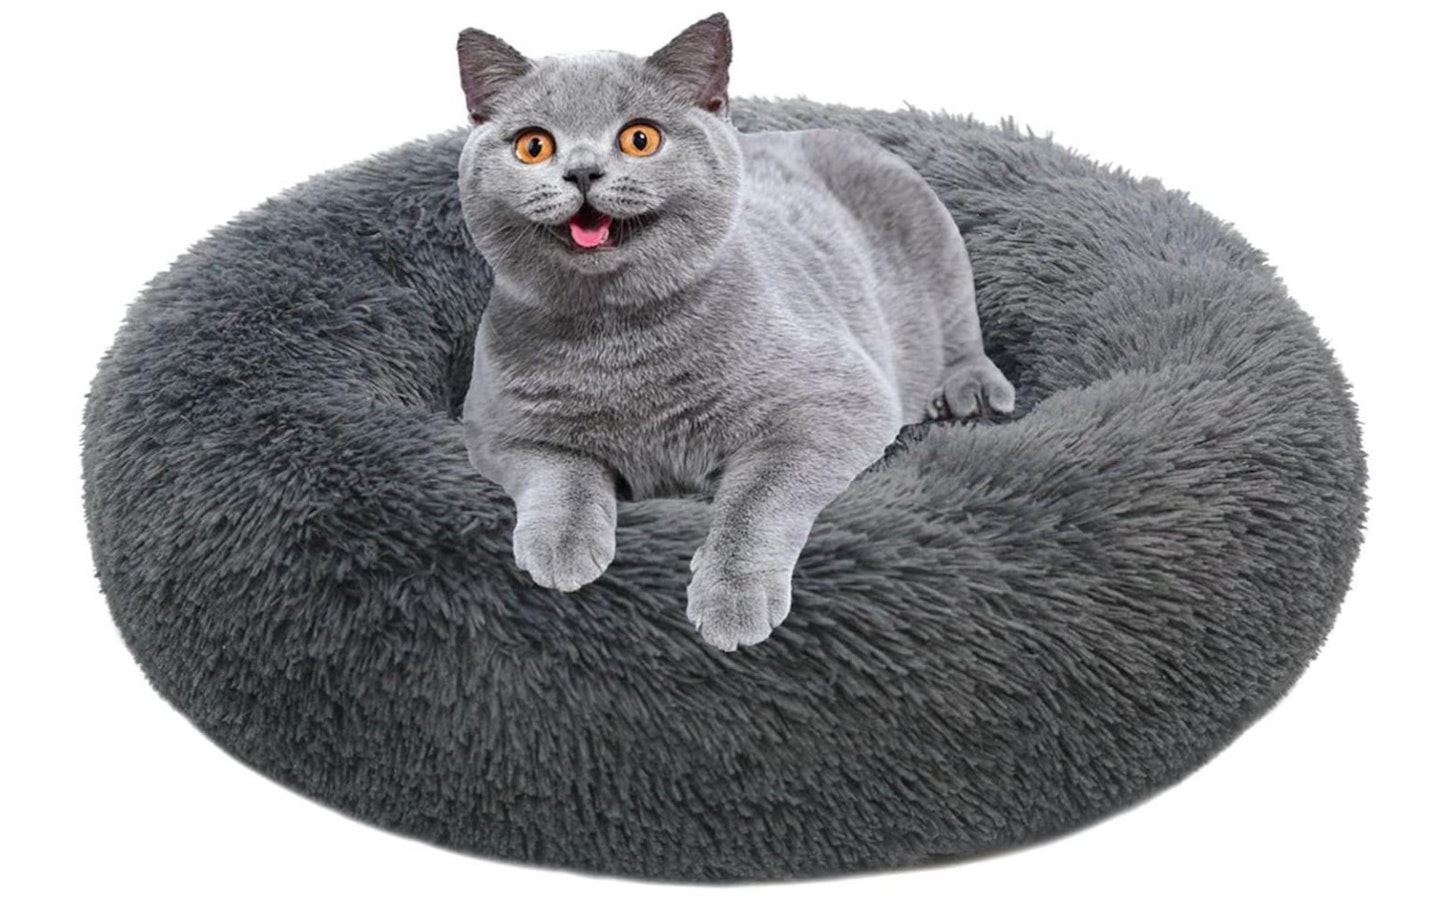  TOHDNC Donut Cat Bed 